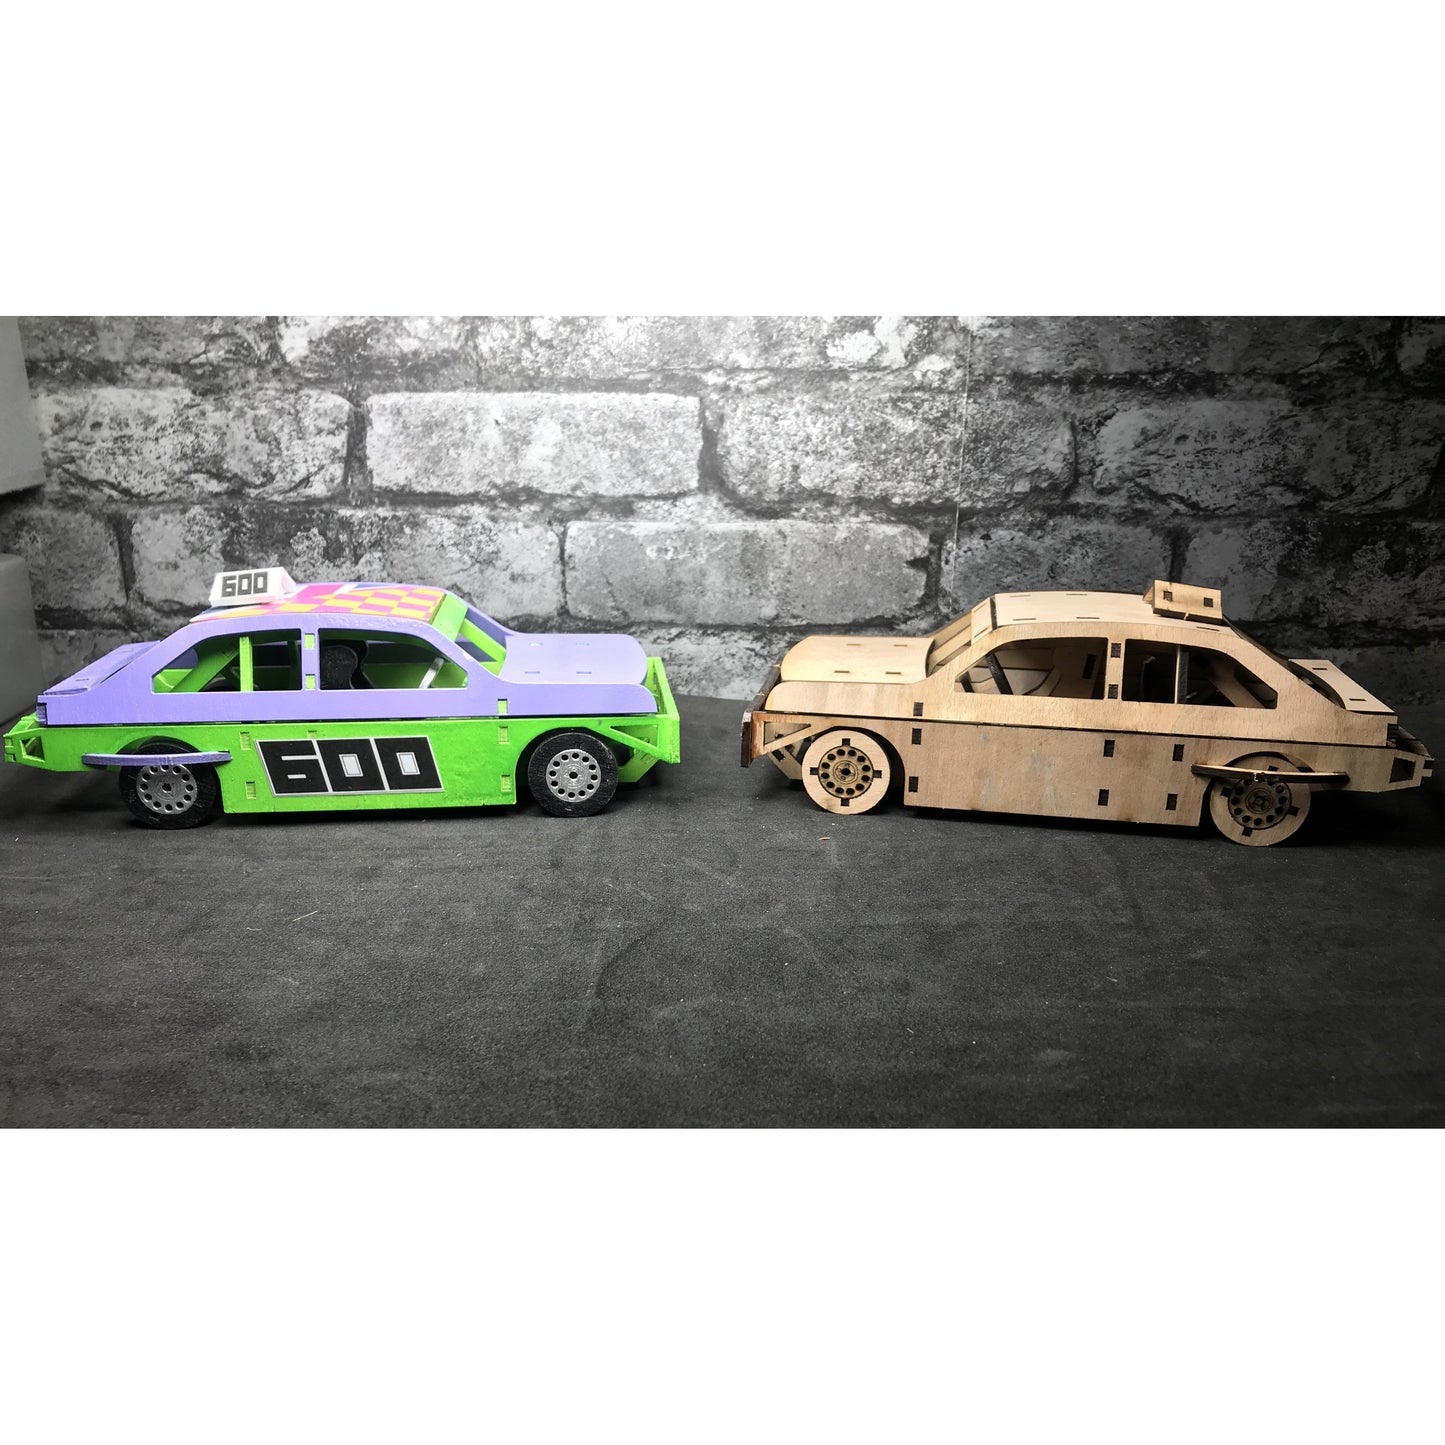 Build Your Own Stock Car | 2L Saloon - Build Your Own - Stock Car & Banger Toy Tracks